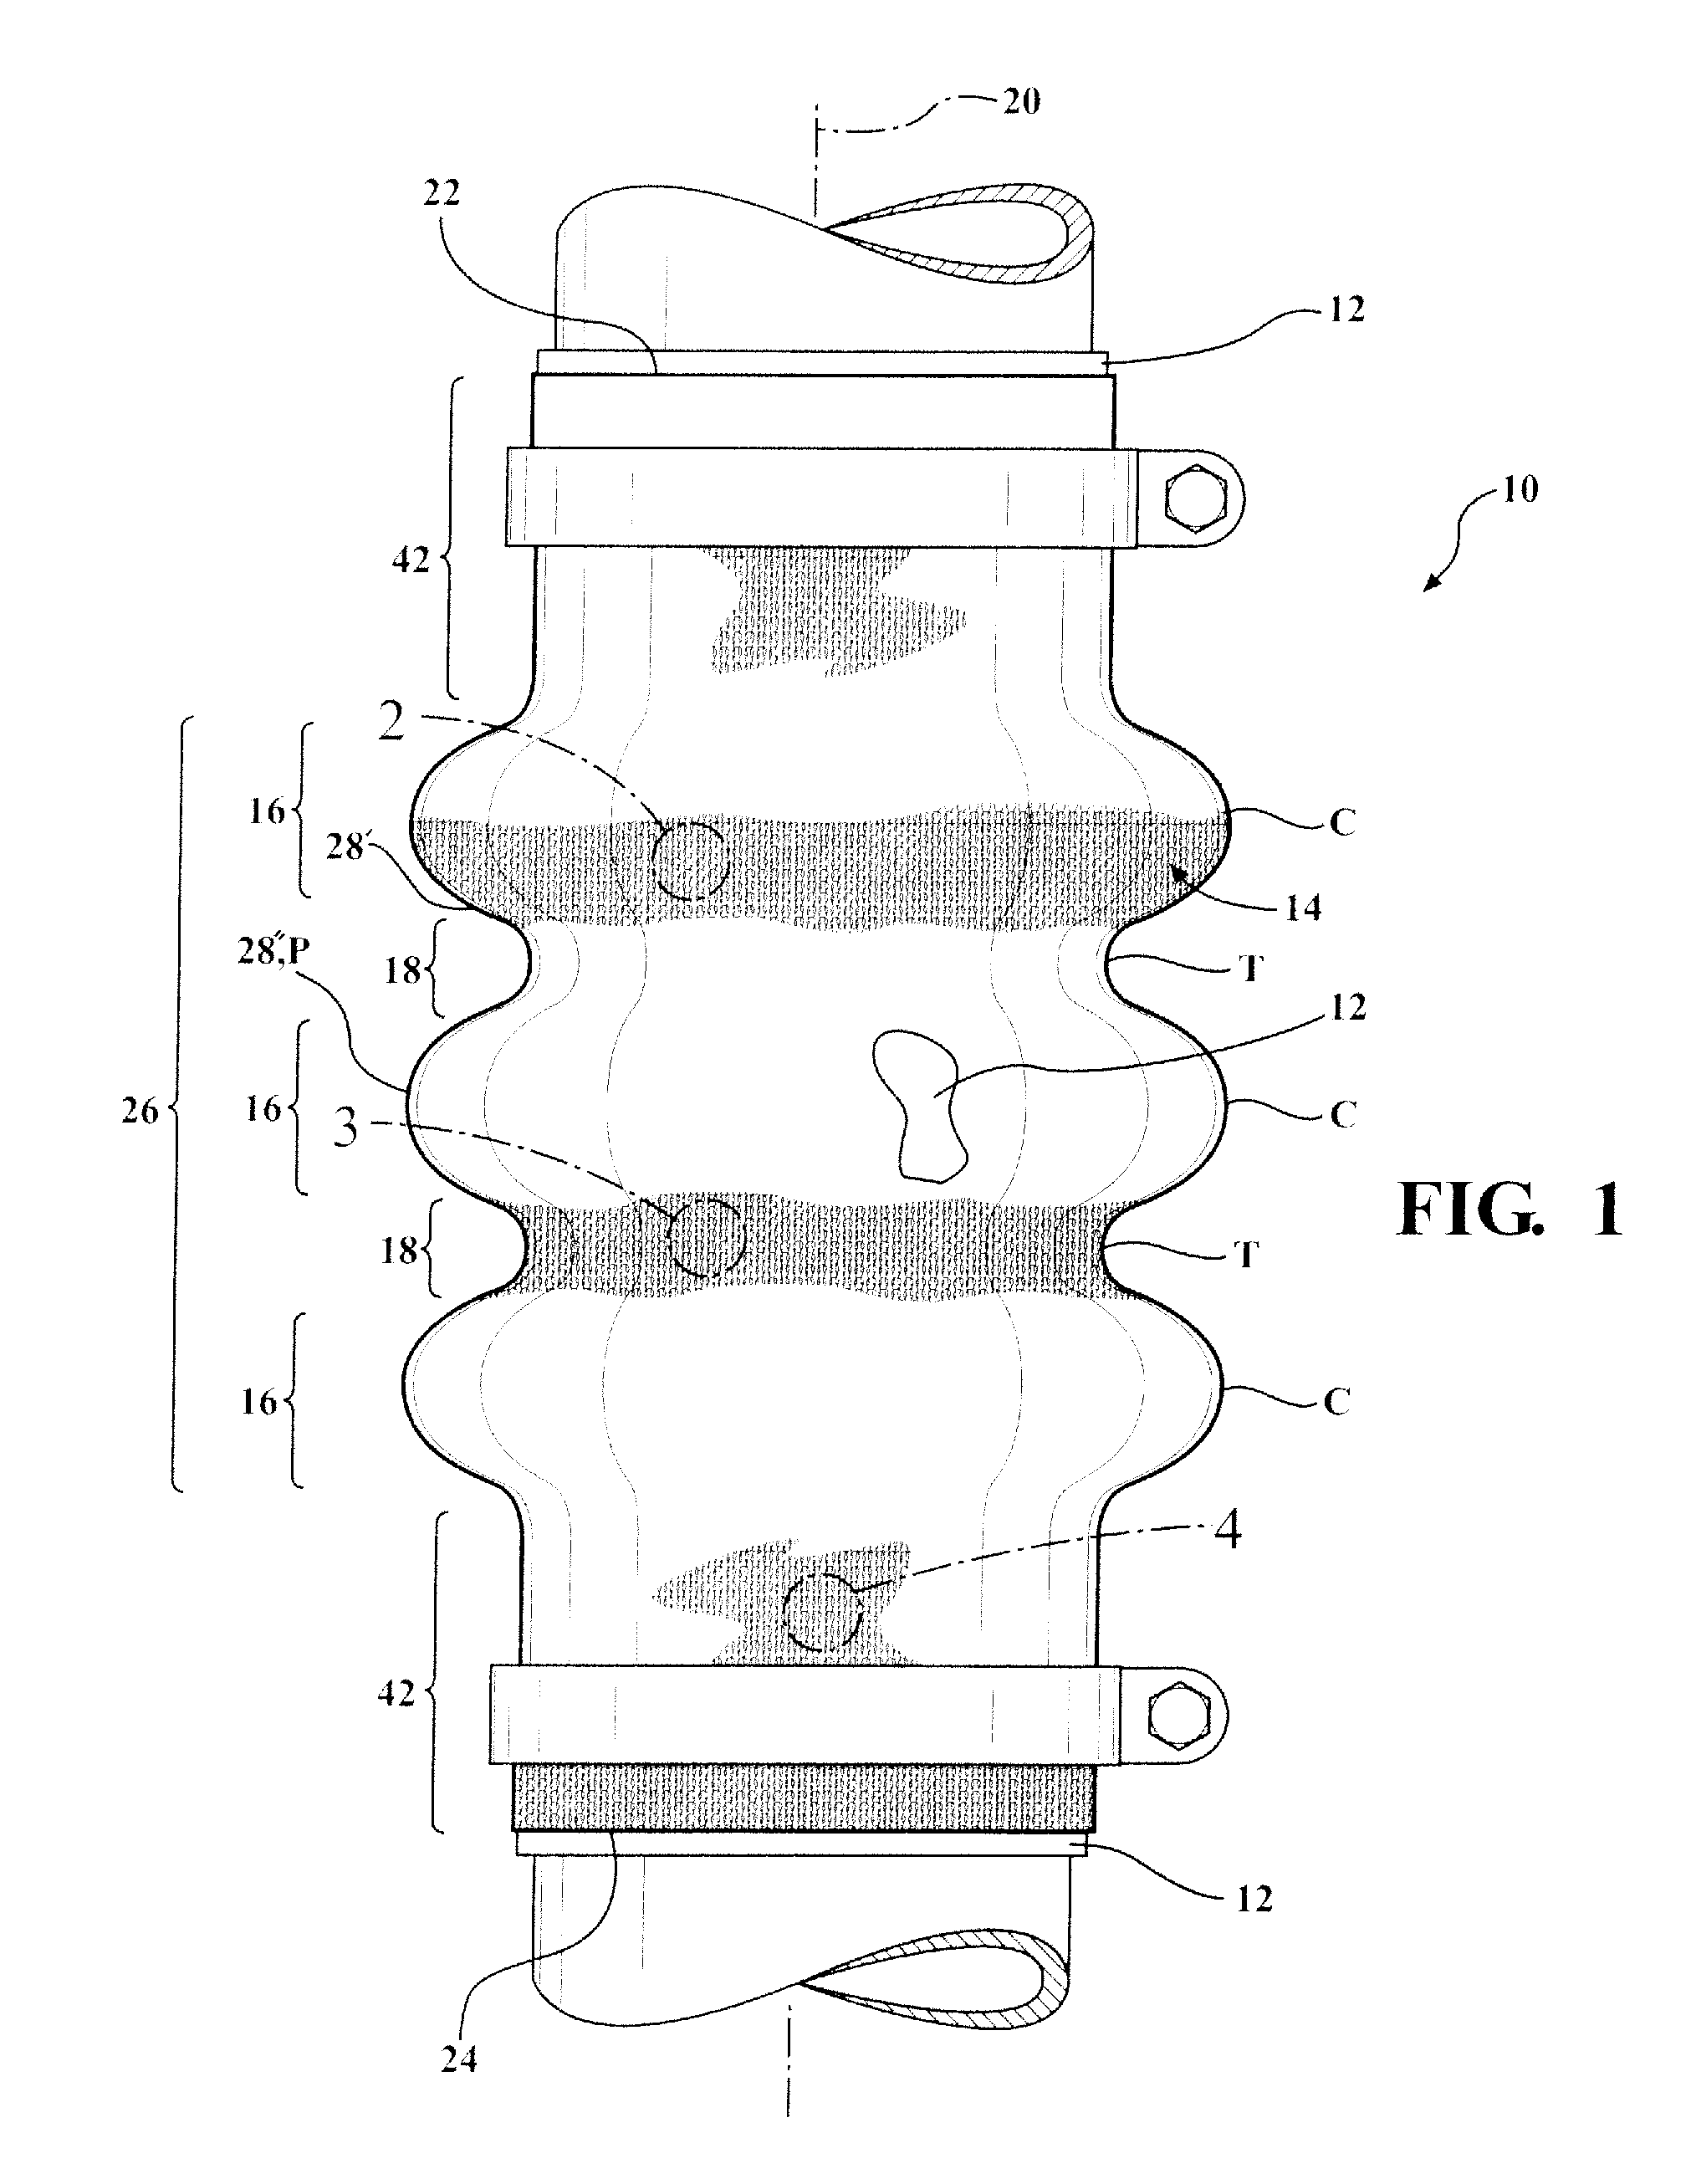 Corrugated Knit Sleeve and Method of Construction Thereof